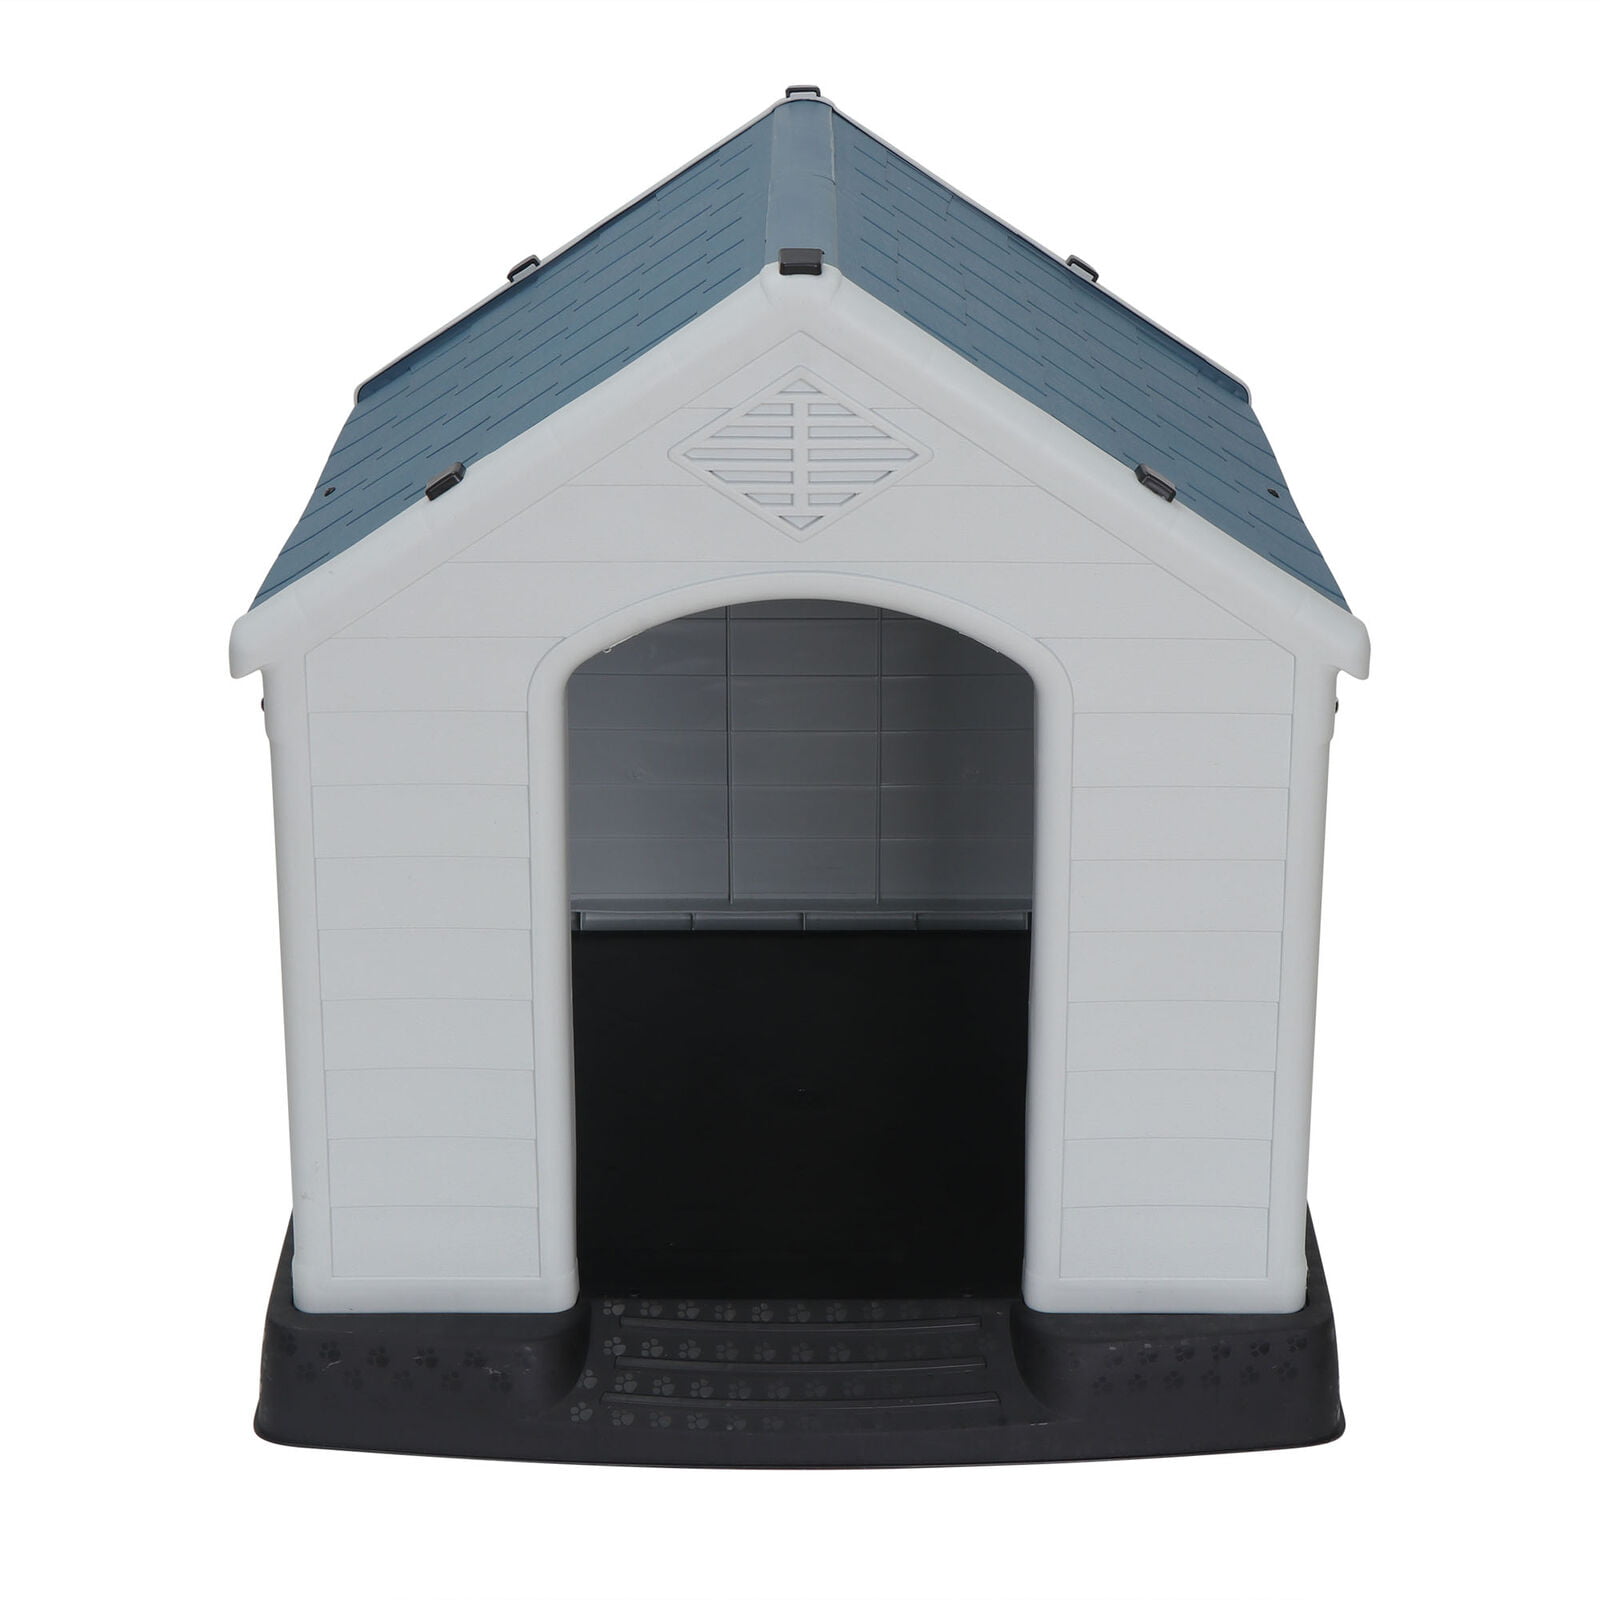  Qily Plastic Dog House Outdoor for Small Medium Dogs, Igloo  Doghouse Waterproof Resin with Openable Top & Elevated Floor, Durable Cat  Puppy Shelter with Handles, Easy to Assemble and Clean(Brown) 